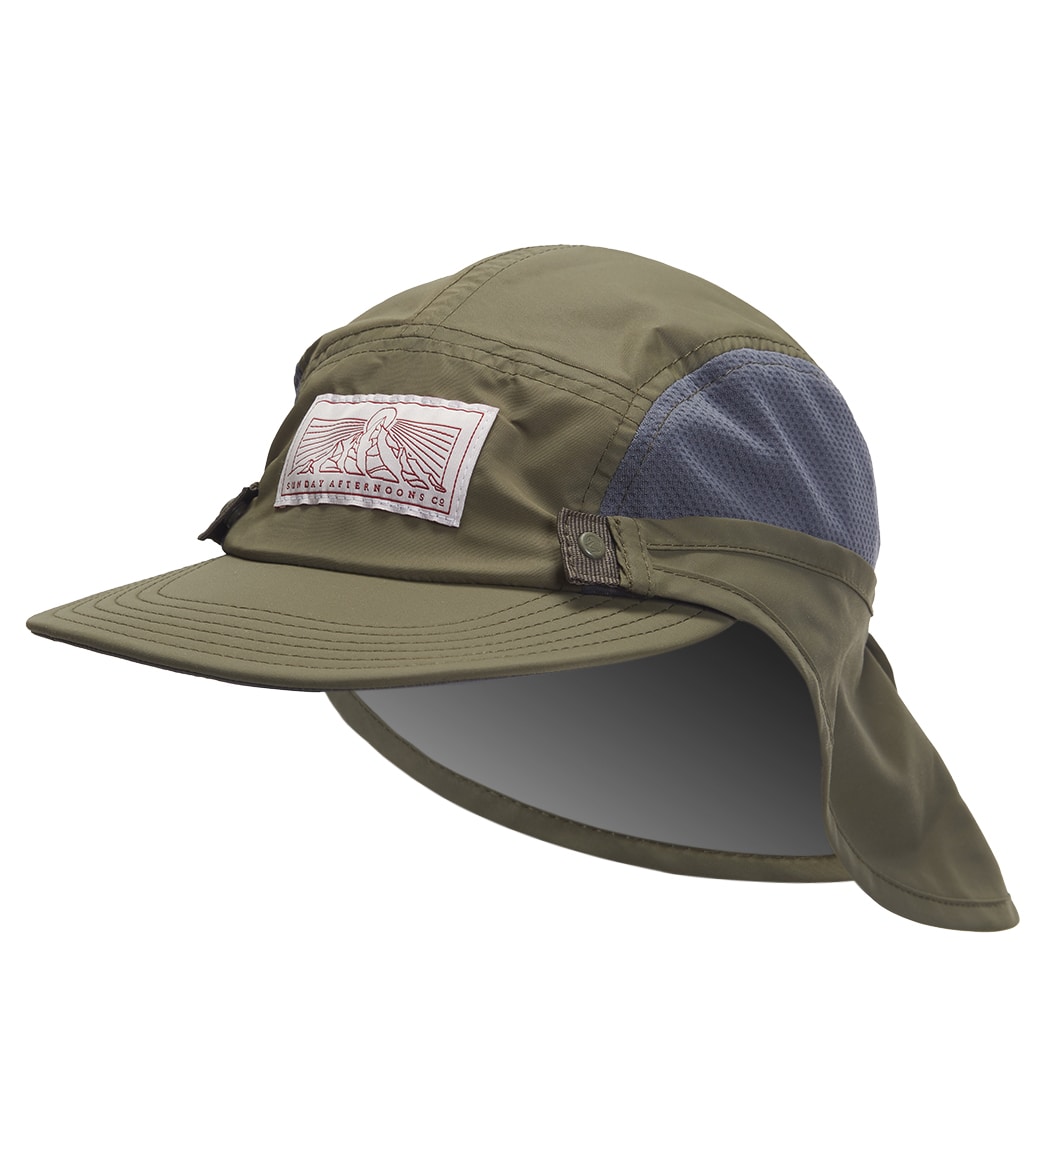 Sunday Afternoons Adventure Mesh Cap - Chaparral Polyester - Swimoutlet.com